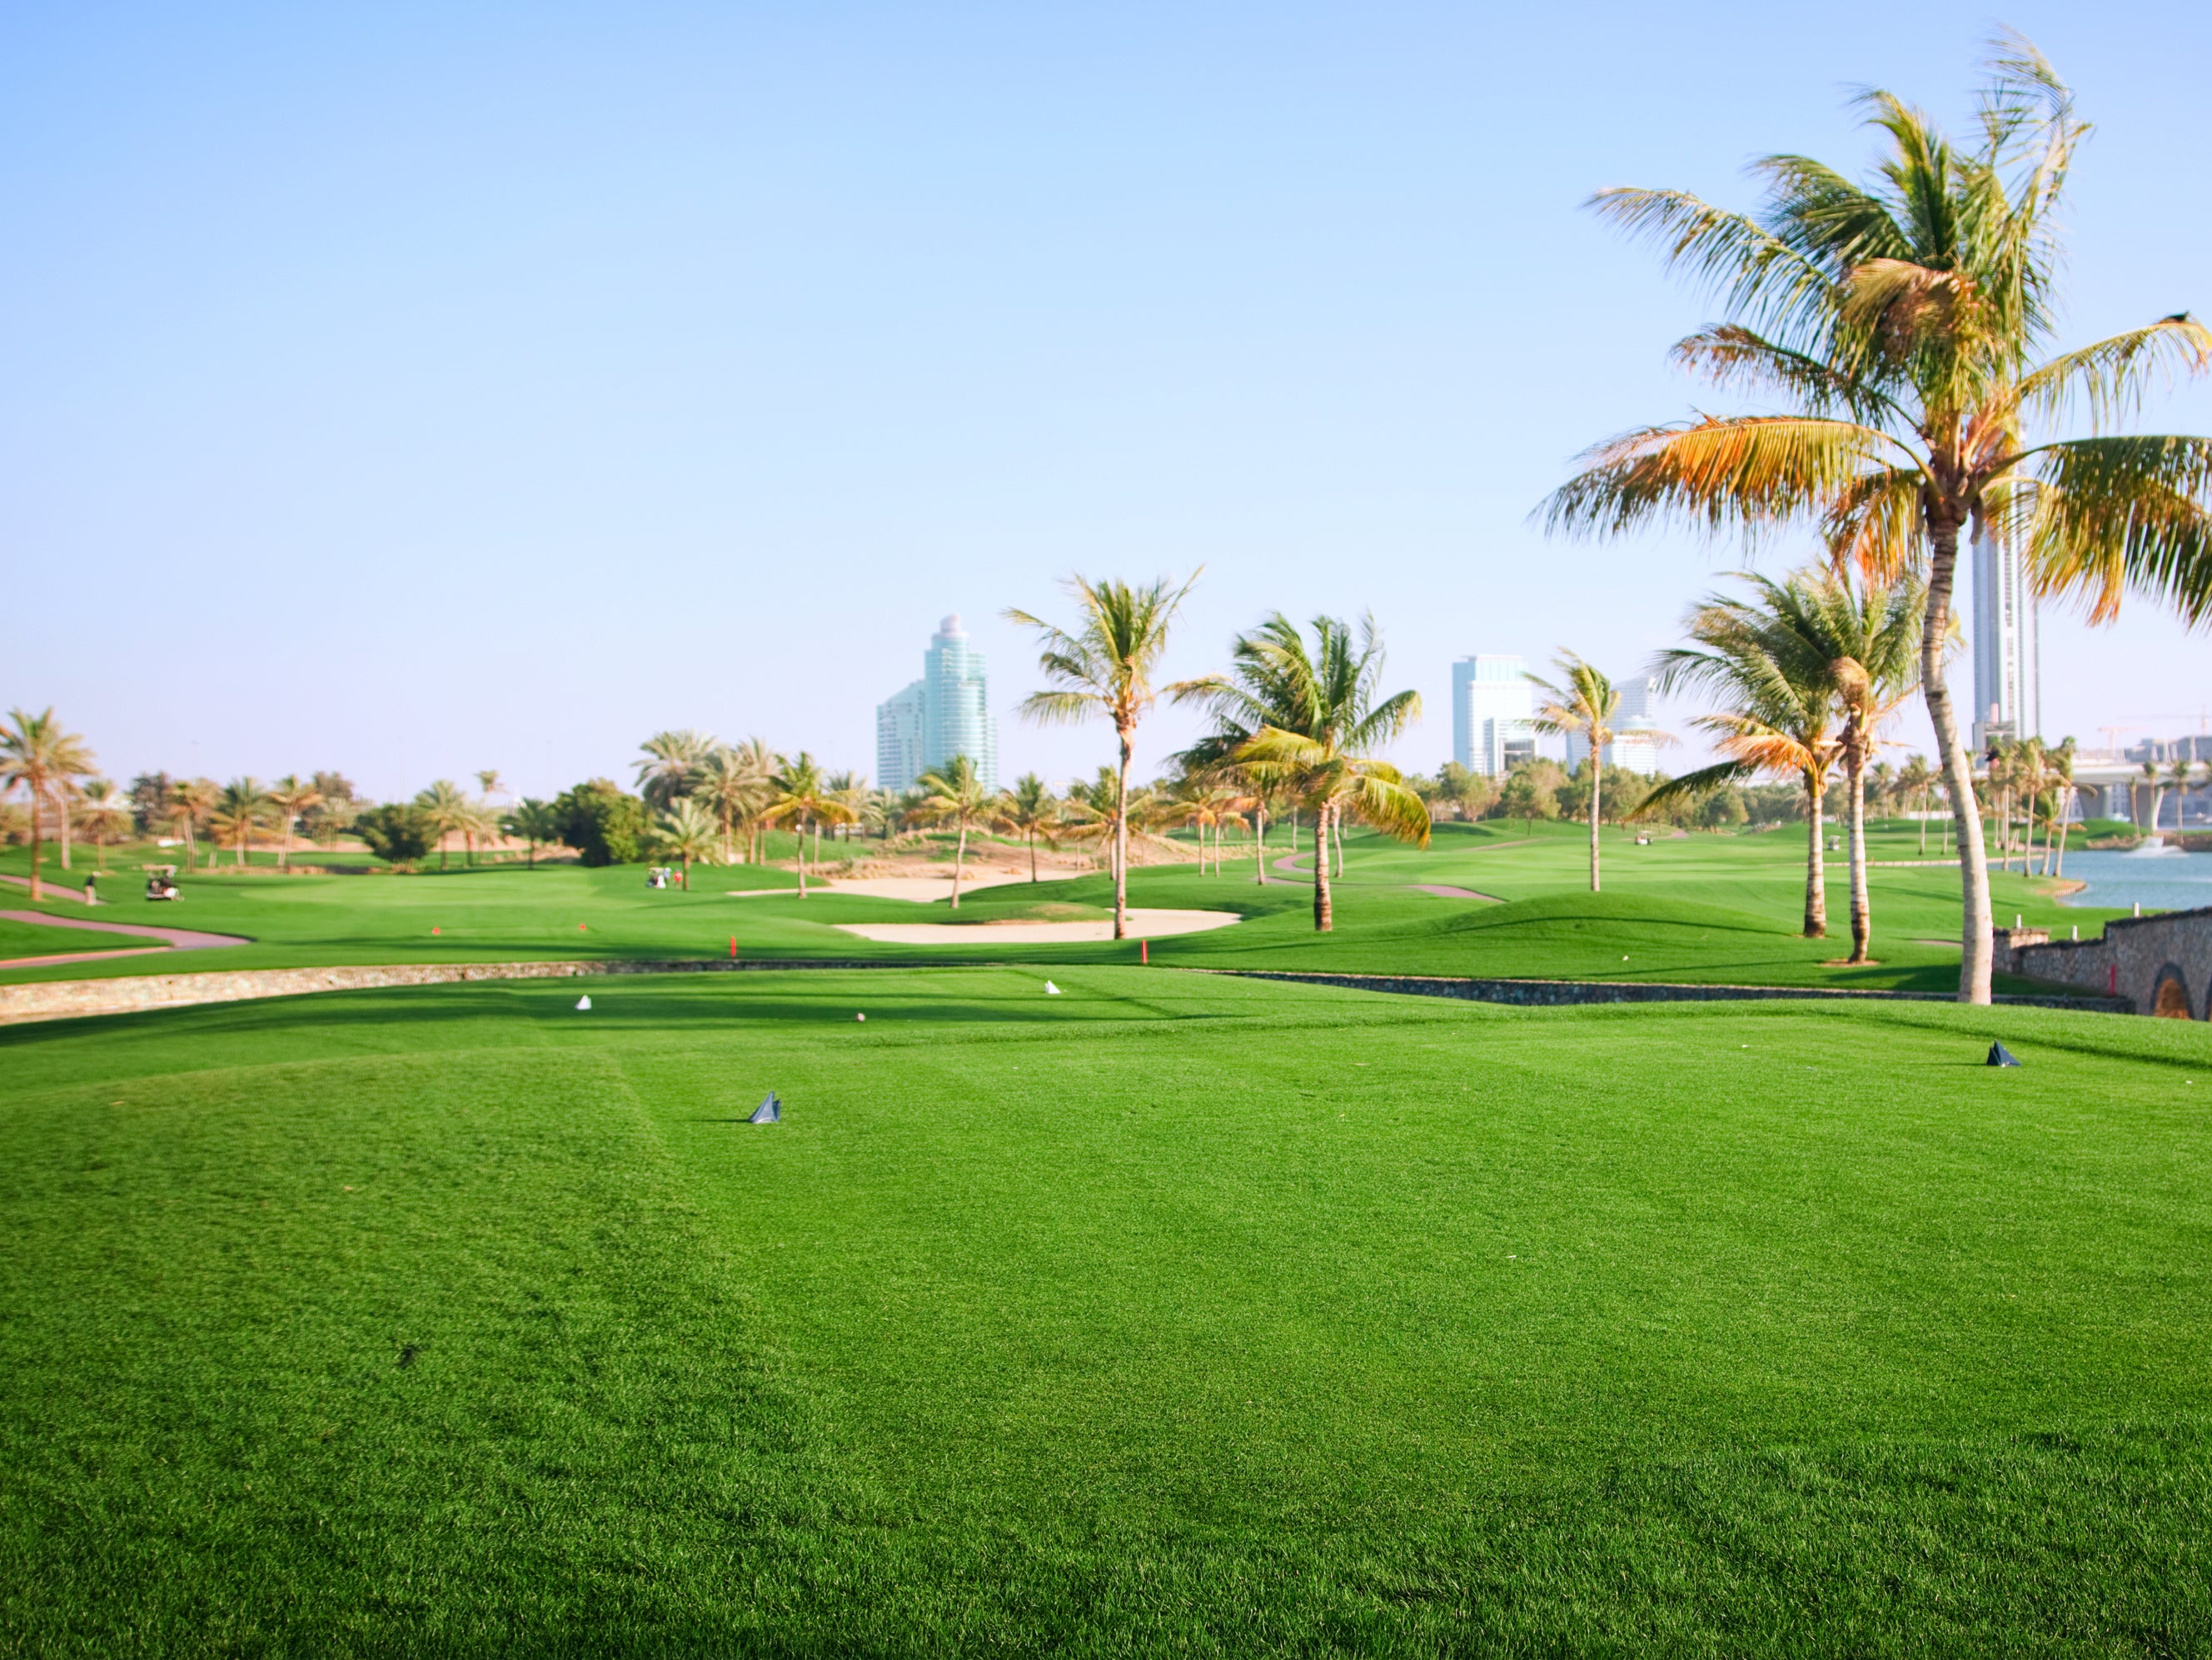 Ther’s plenty of courses to be found in Dubai